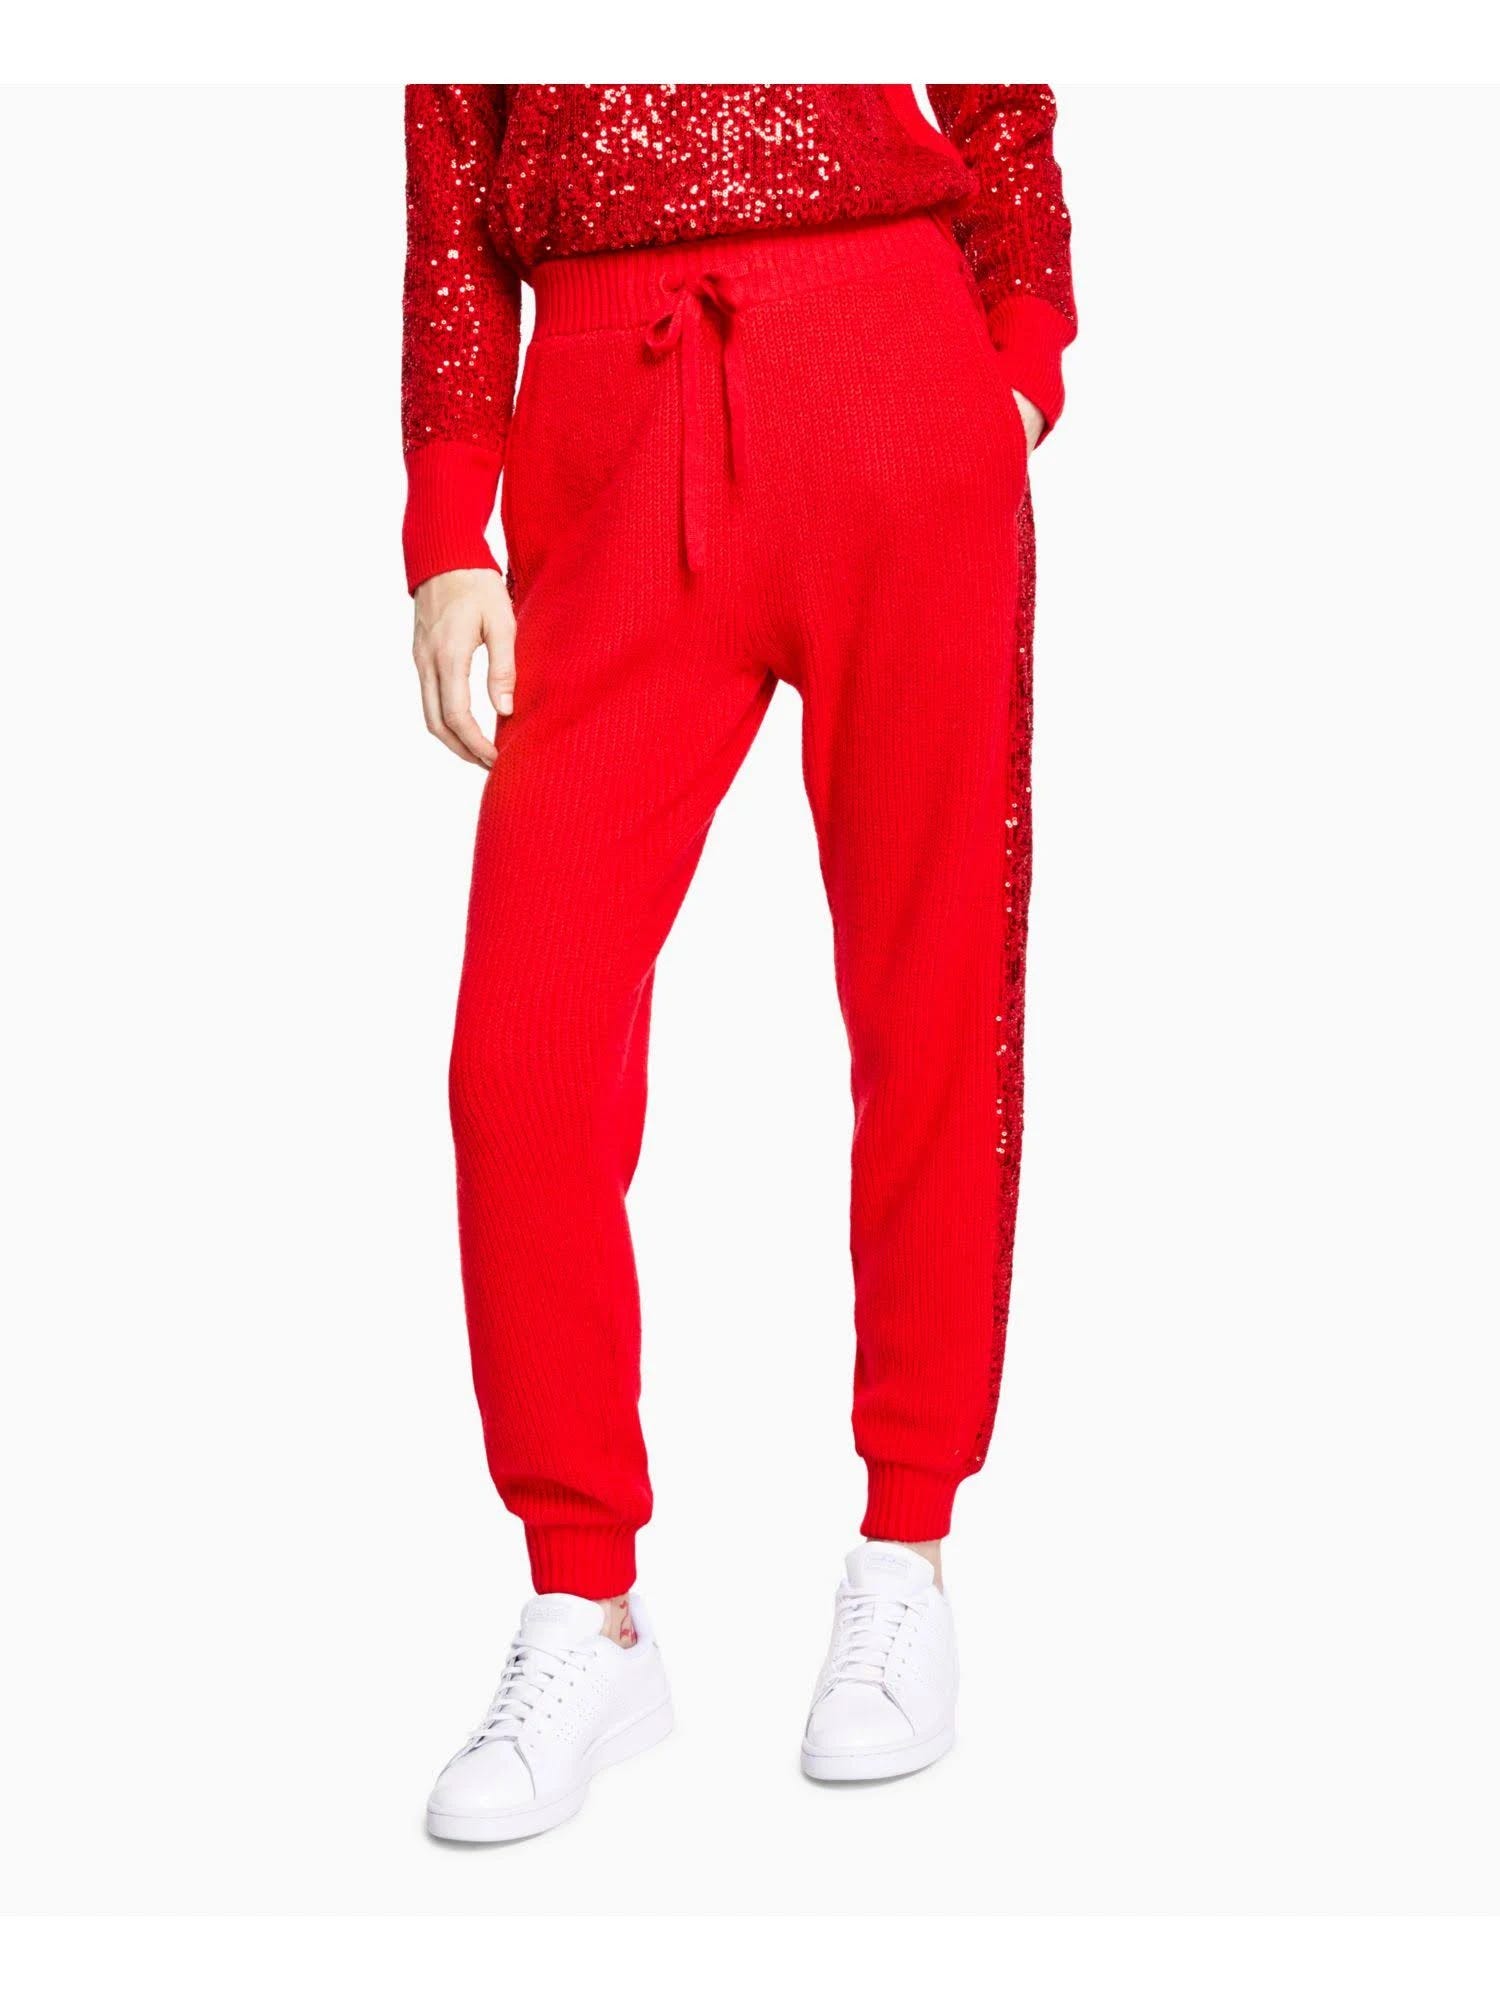 Fashionable High-Waist Red Joggers for Women by INC | Image